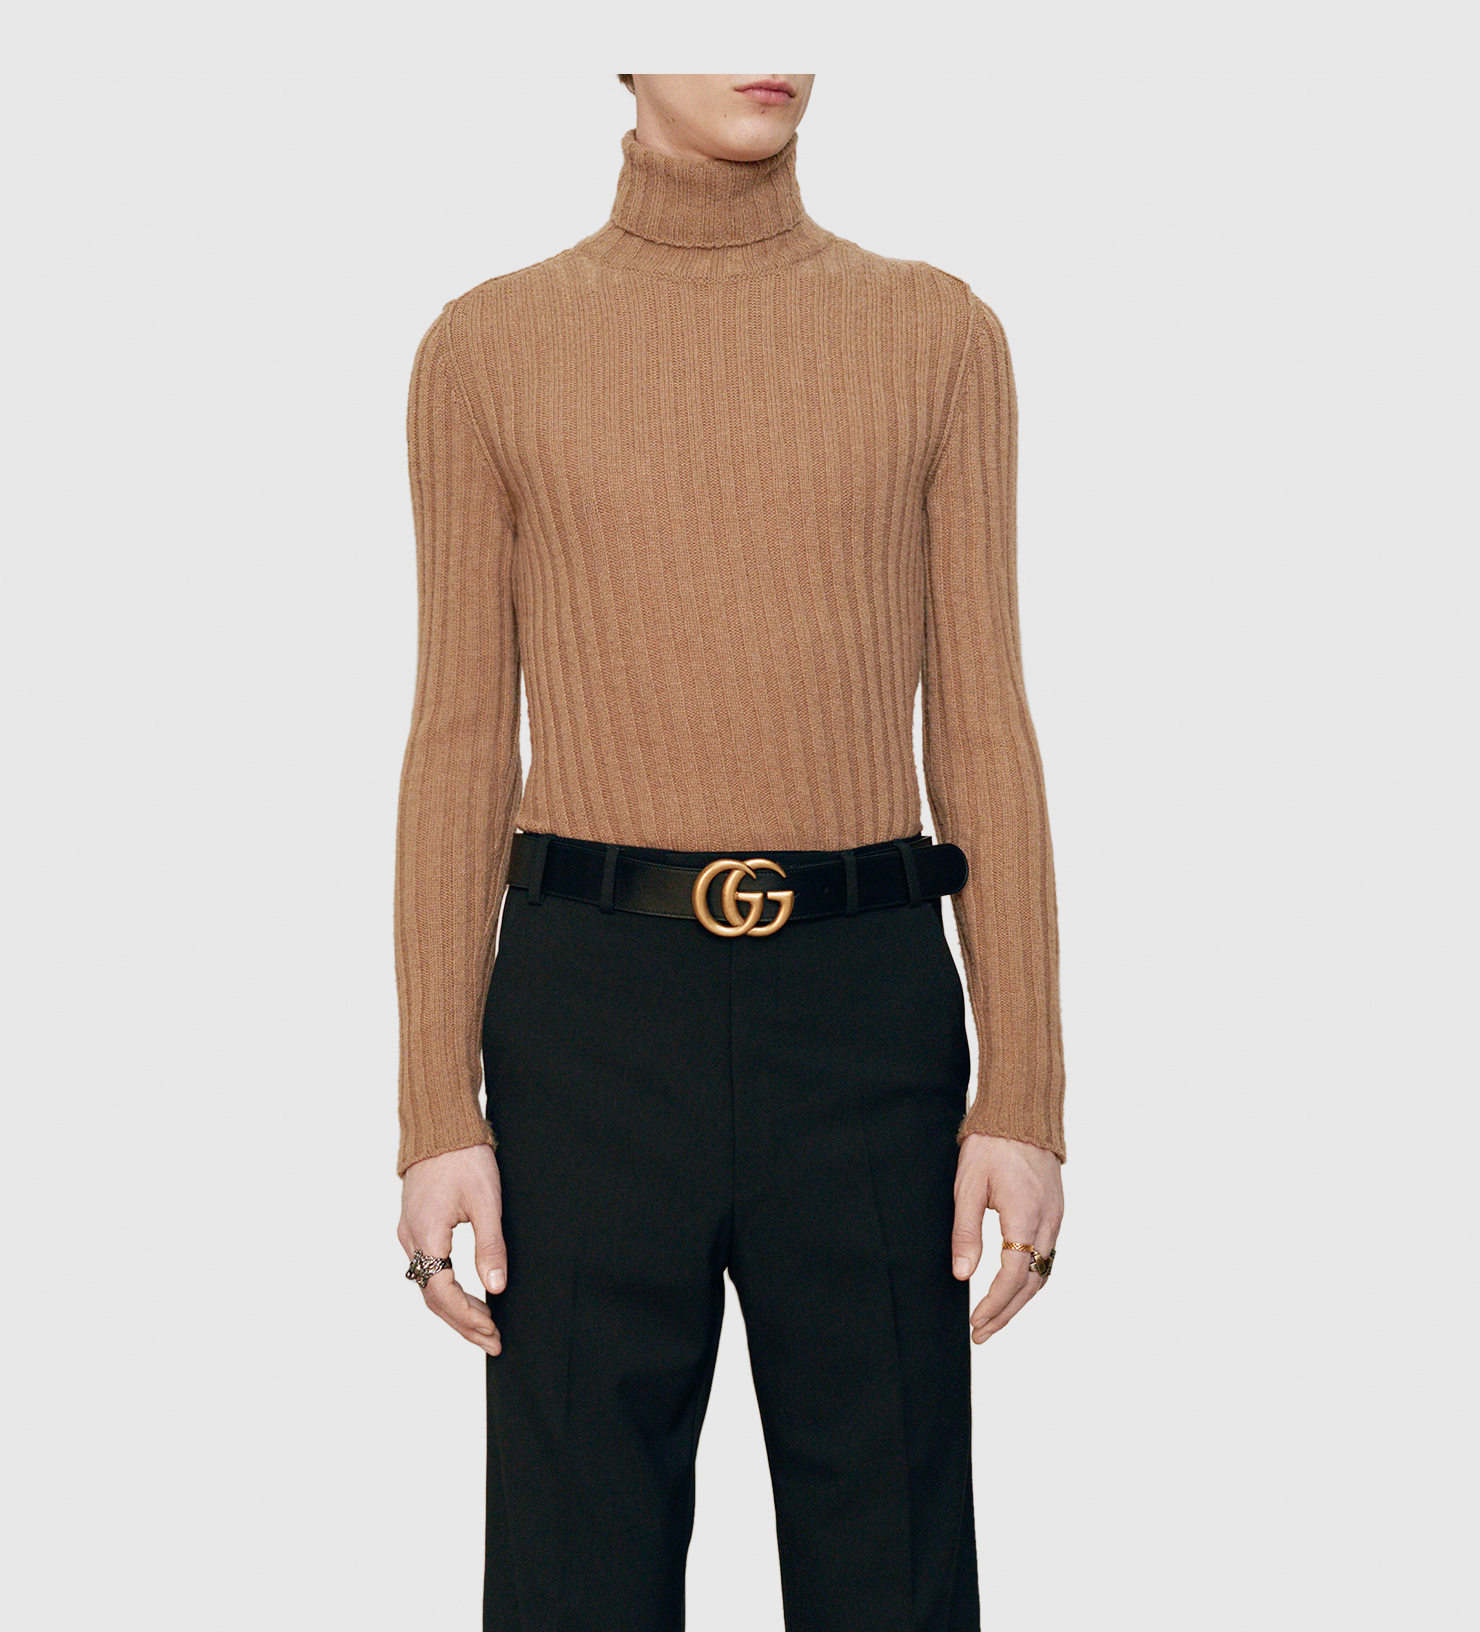 Gucci Camel Turtleneck Sweater in Natural for Men - Lyst